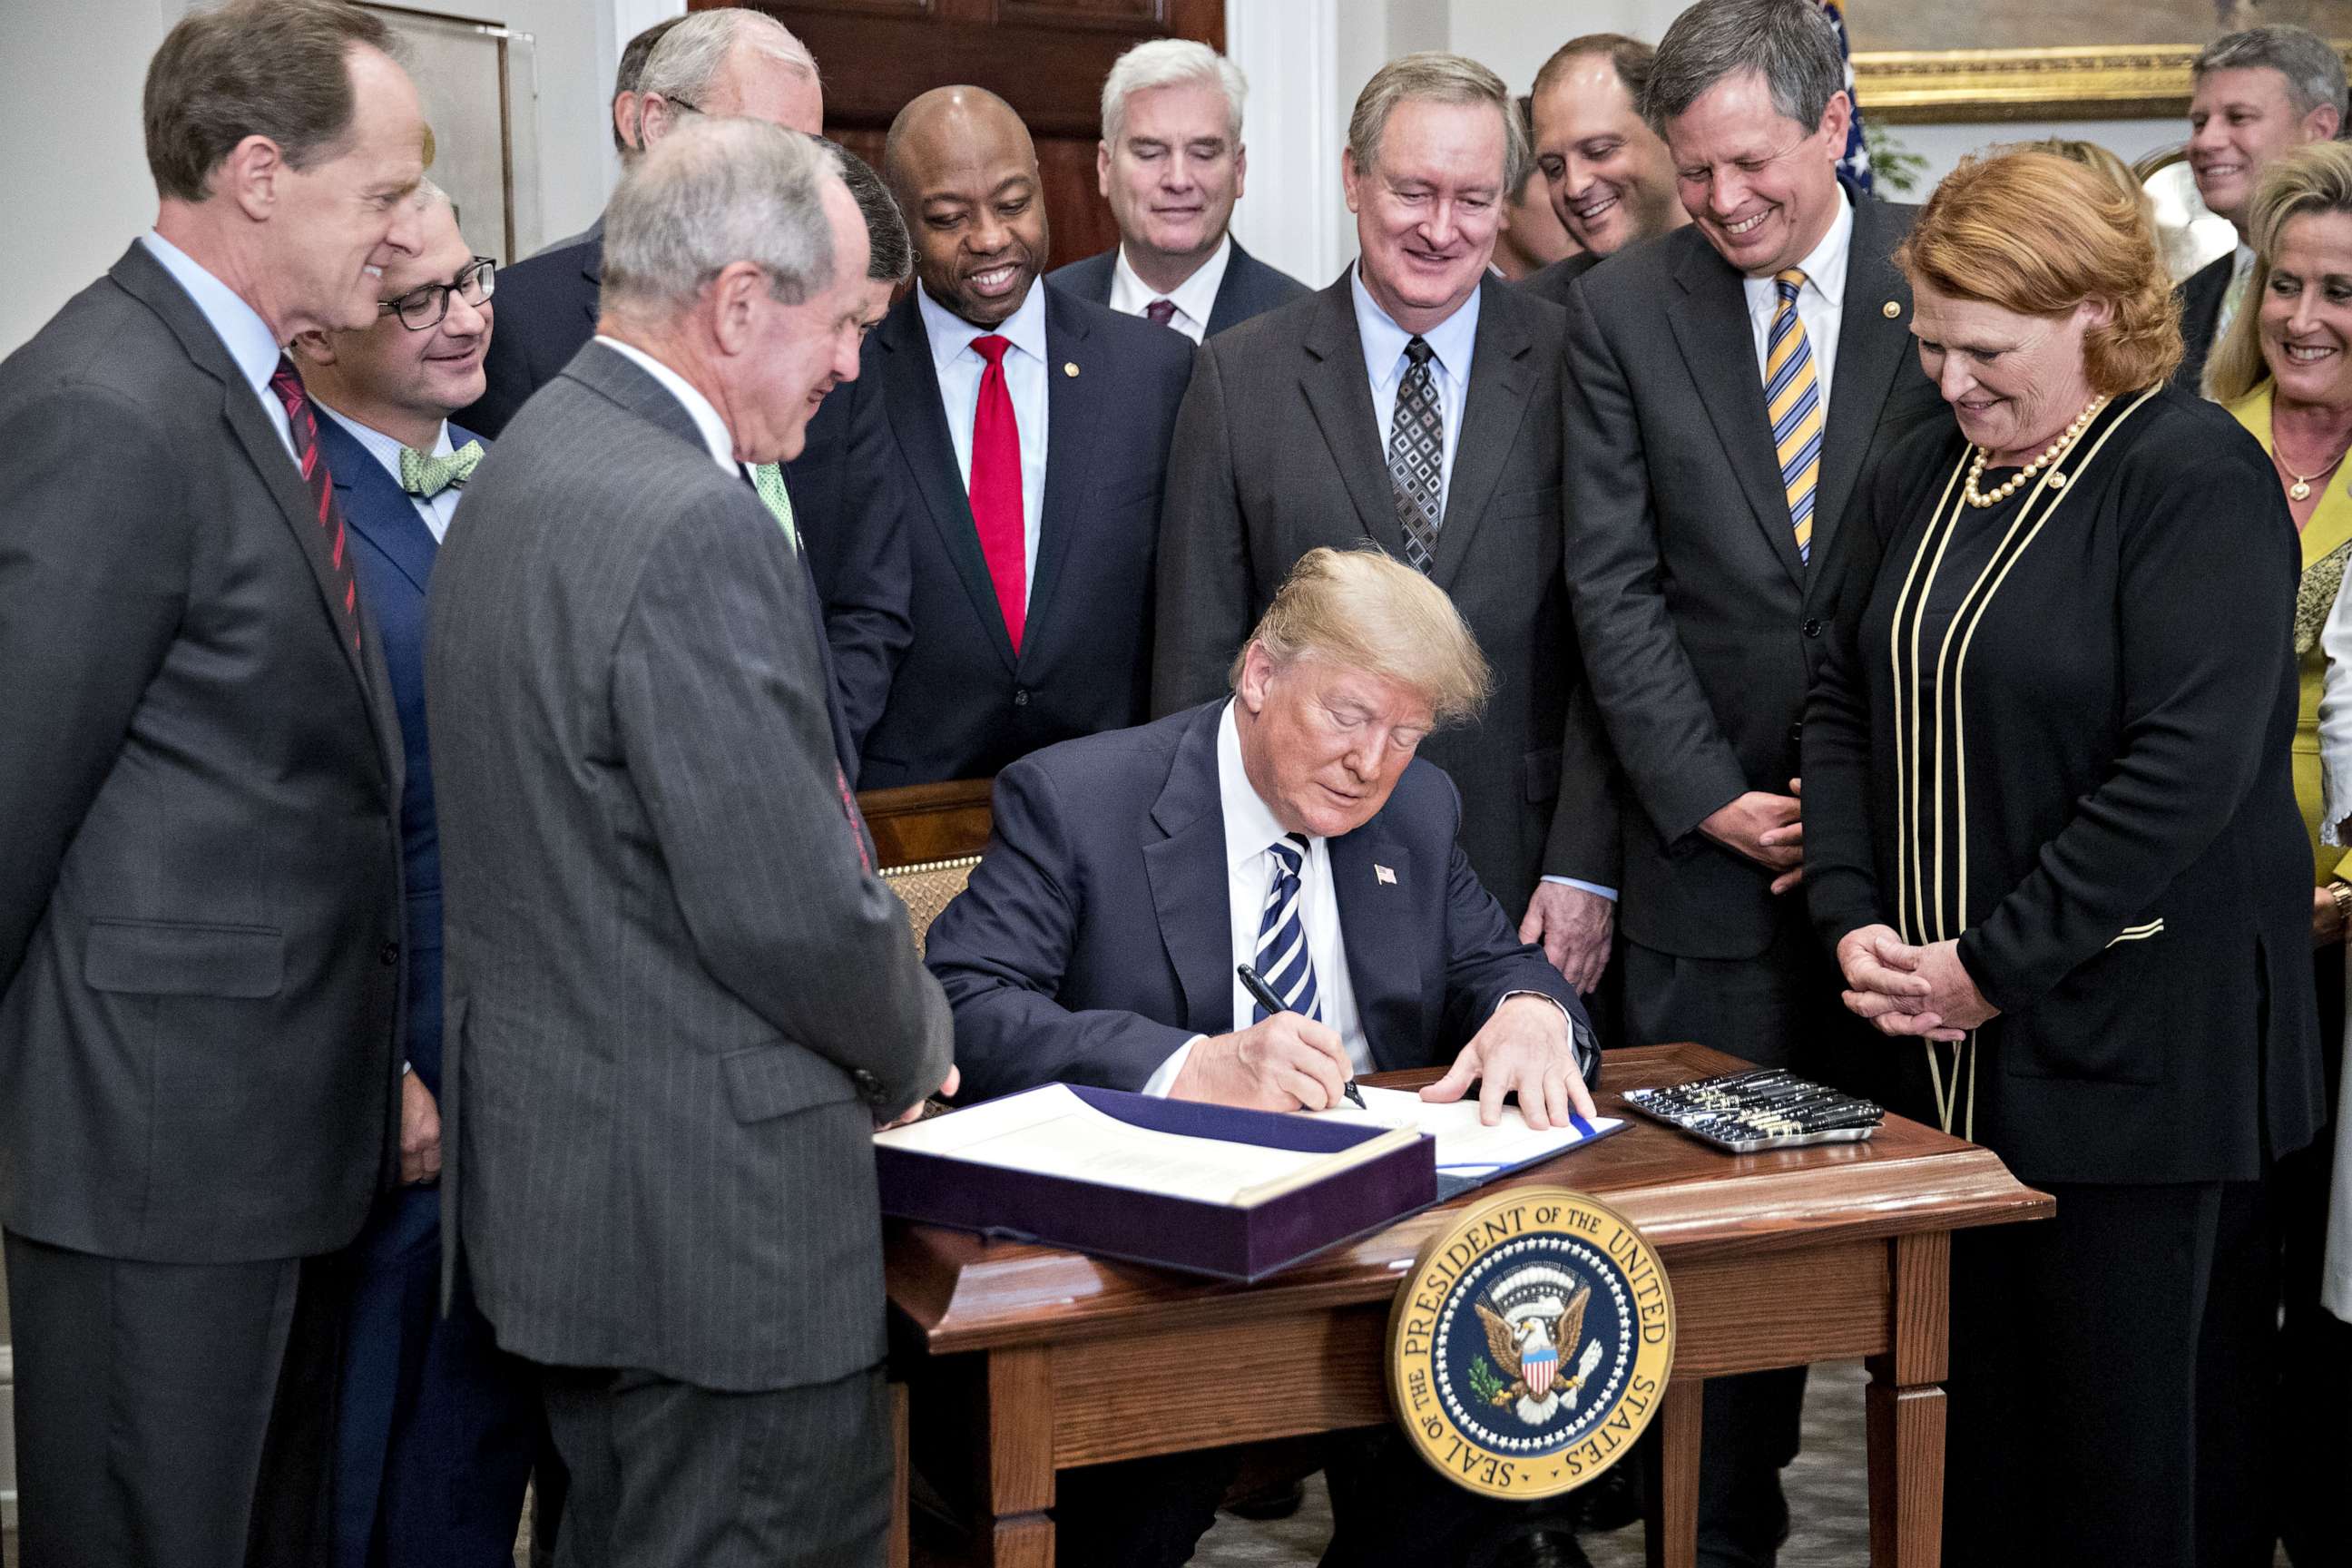 PHOTO: President Donald Trump signs S. 2155, the Economic Growth, Regulatory Relief, And Consumer Protection Act, with administration officials and members of Congress in Washington, May 24, 2018.